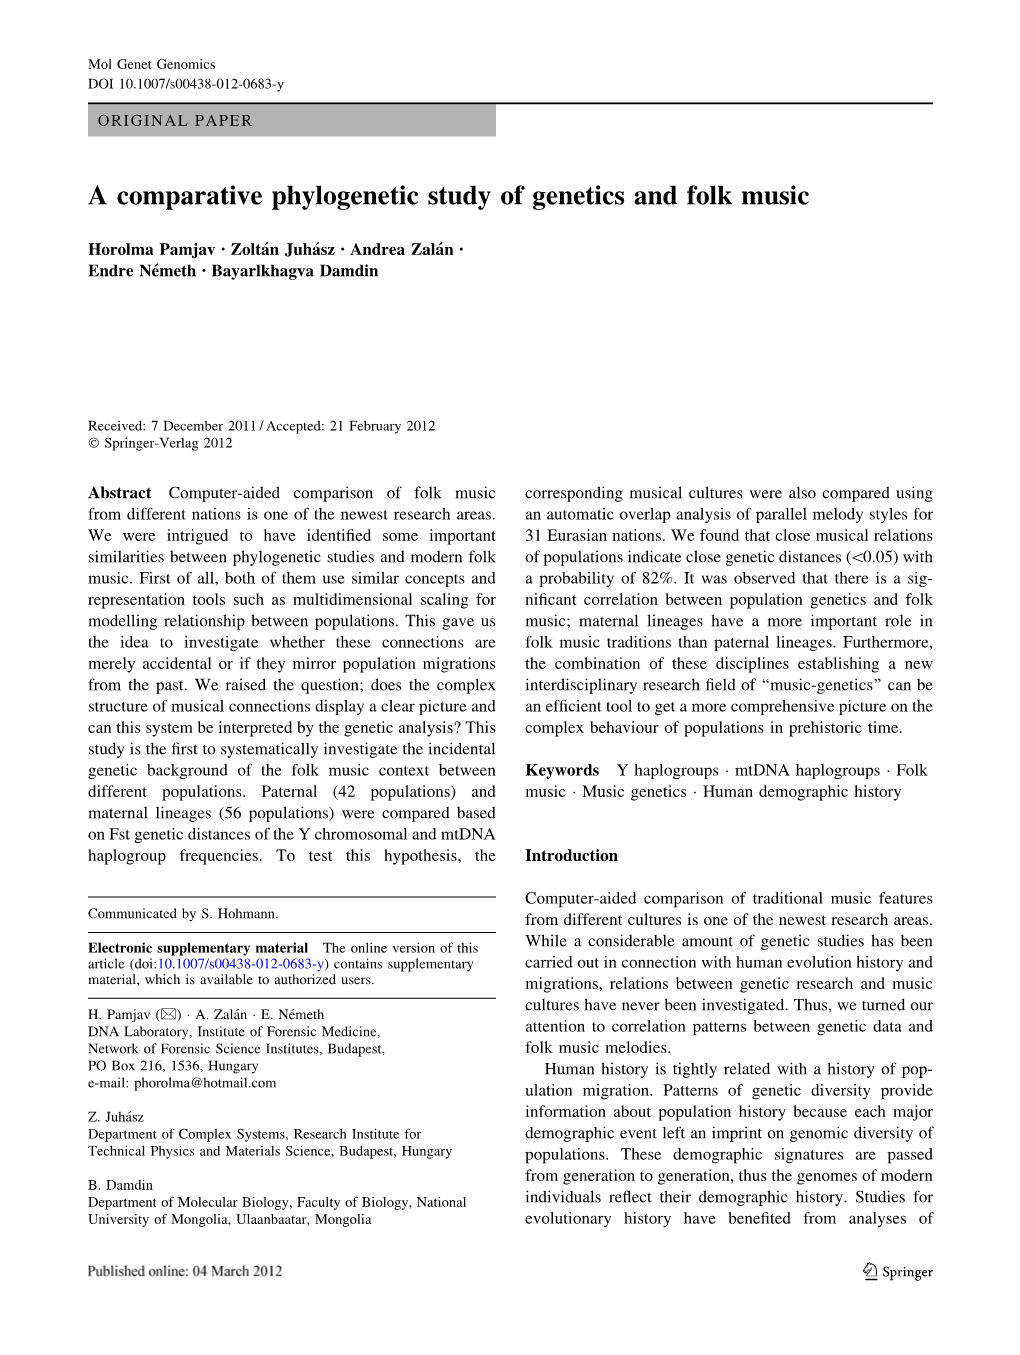 A Comparative Phylogenetic Study of Genetics and Folk Music